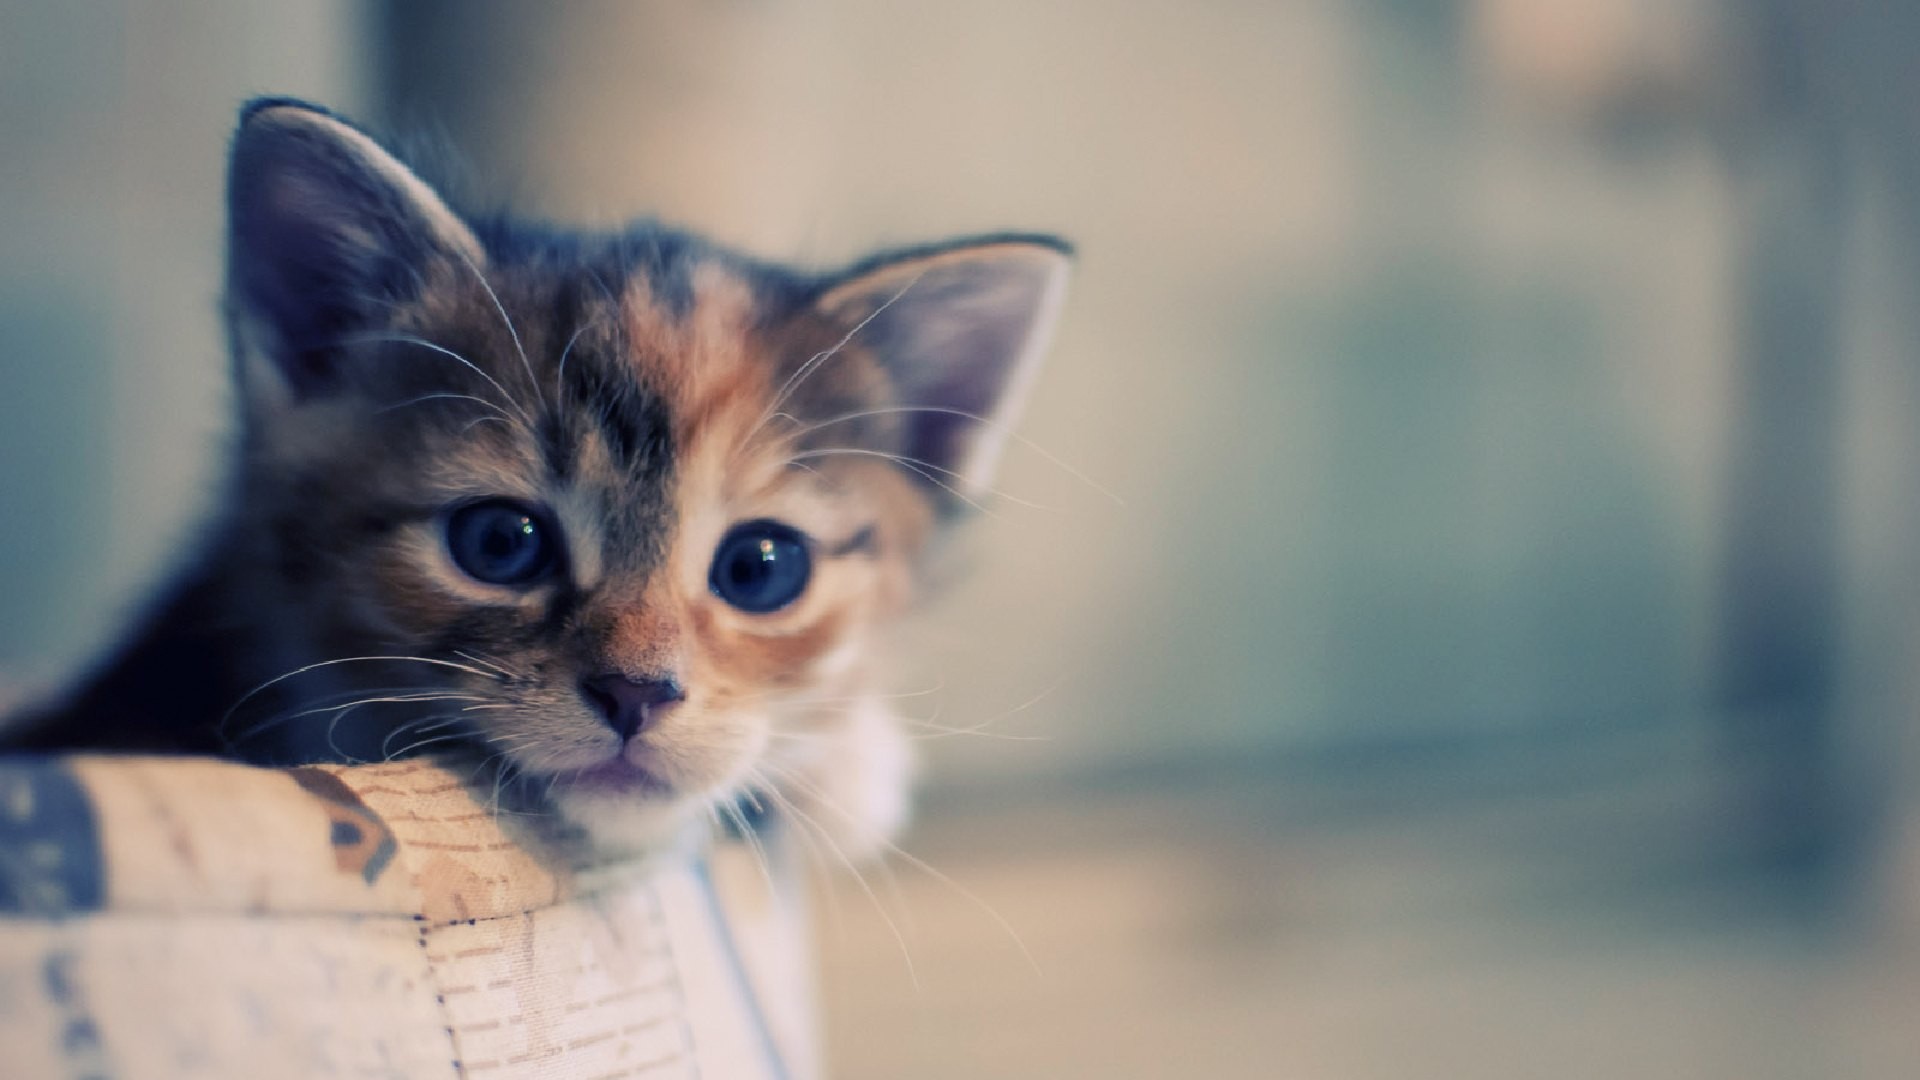 Cute Kittens Wallpaper Cat Pictures